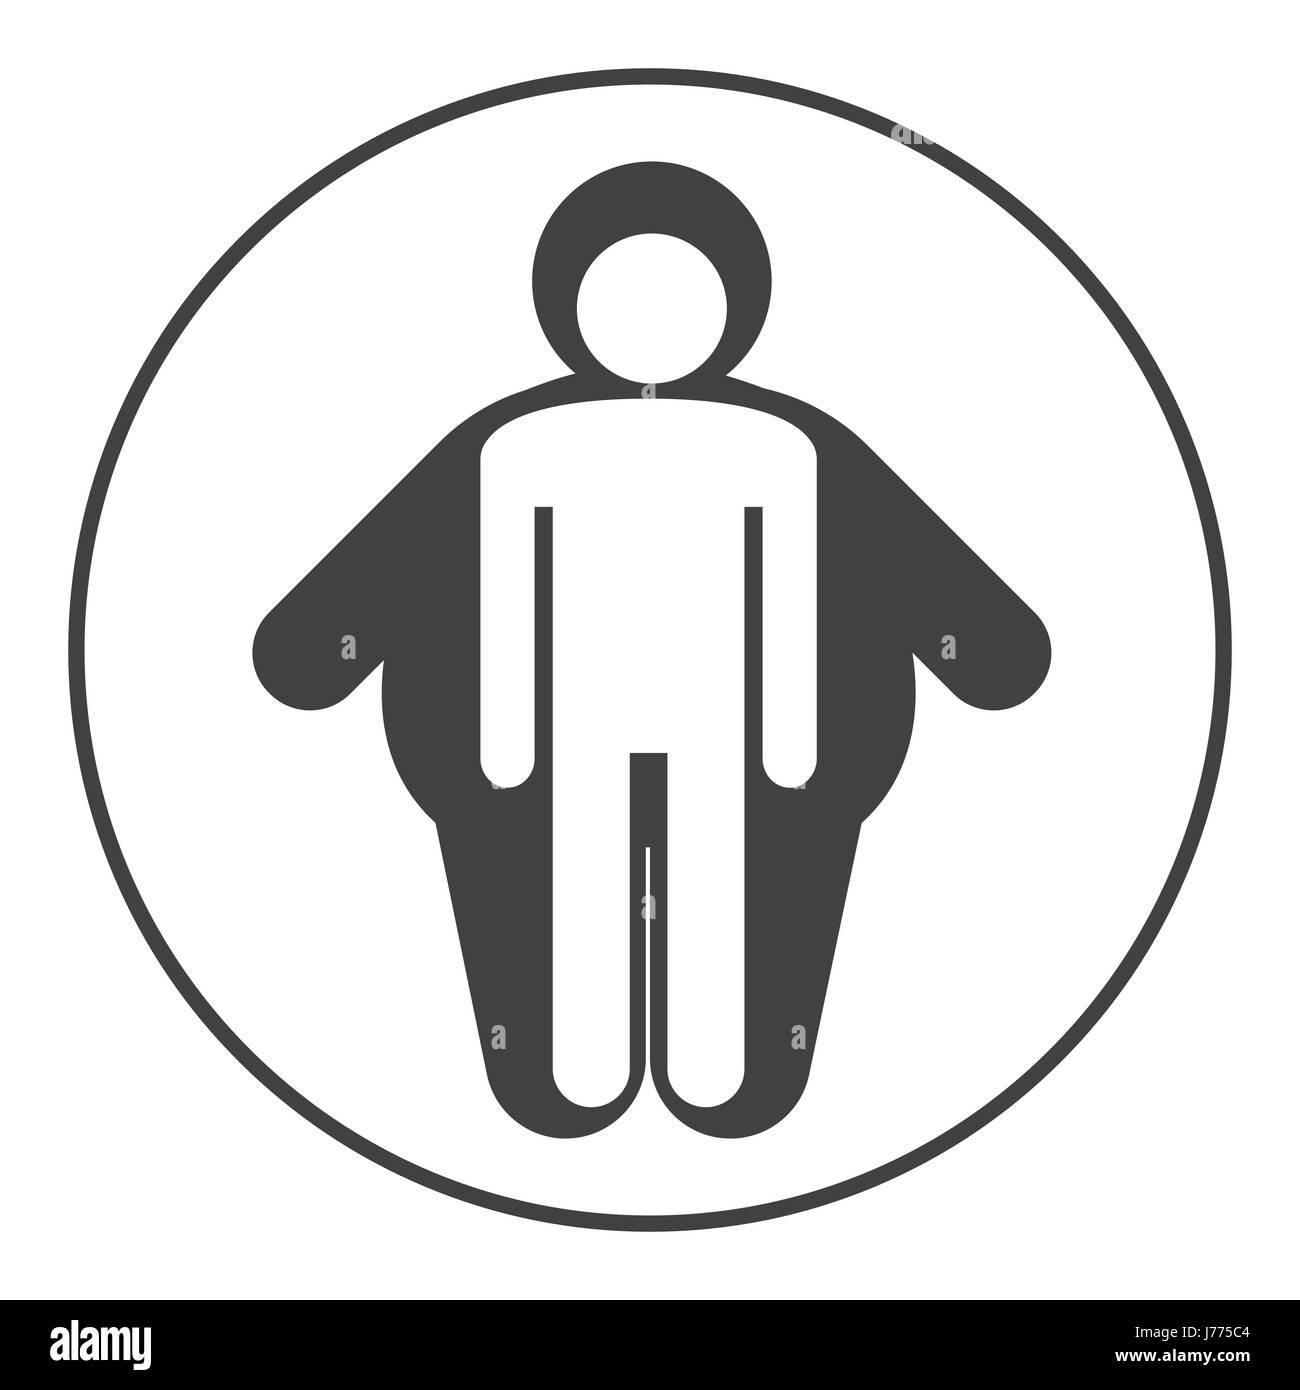 Fat Slim Silhouette Black And White Stock Photos Images, 47% OFF